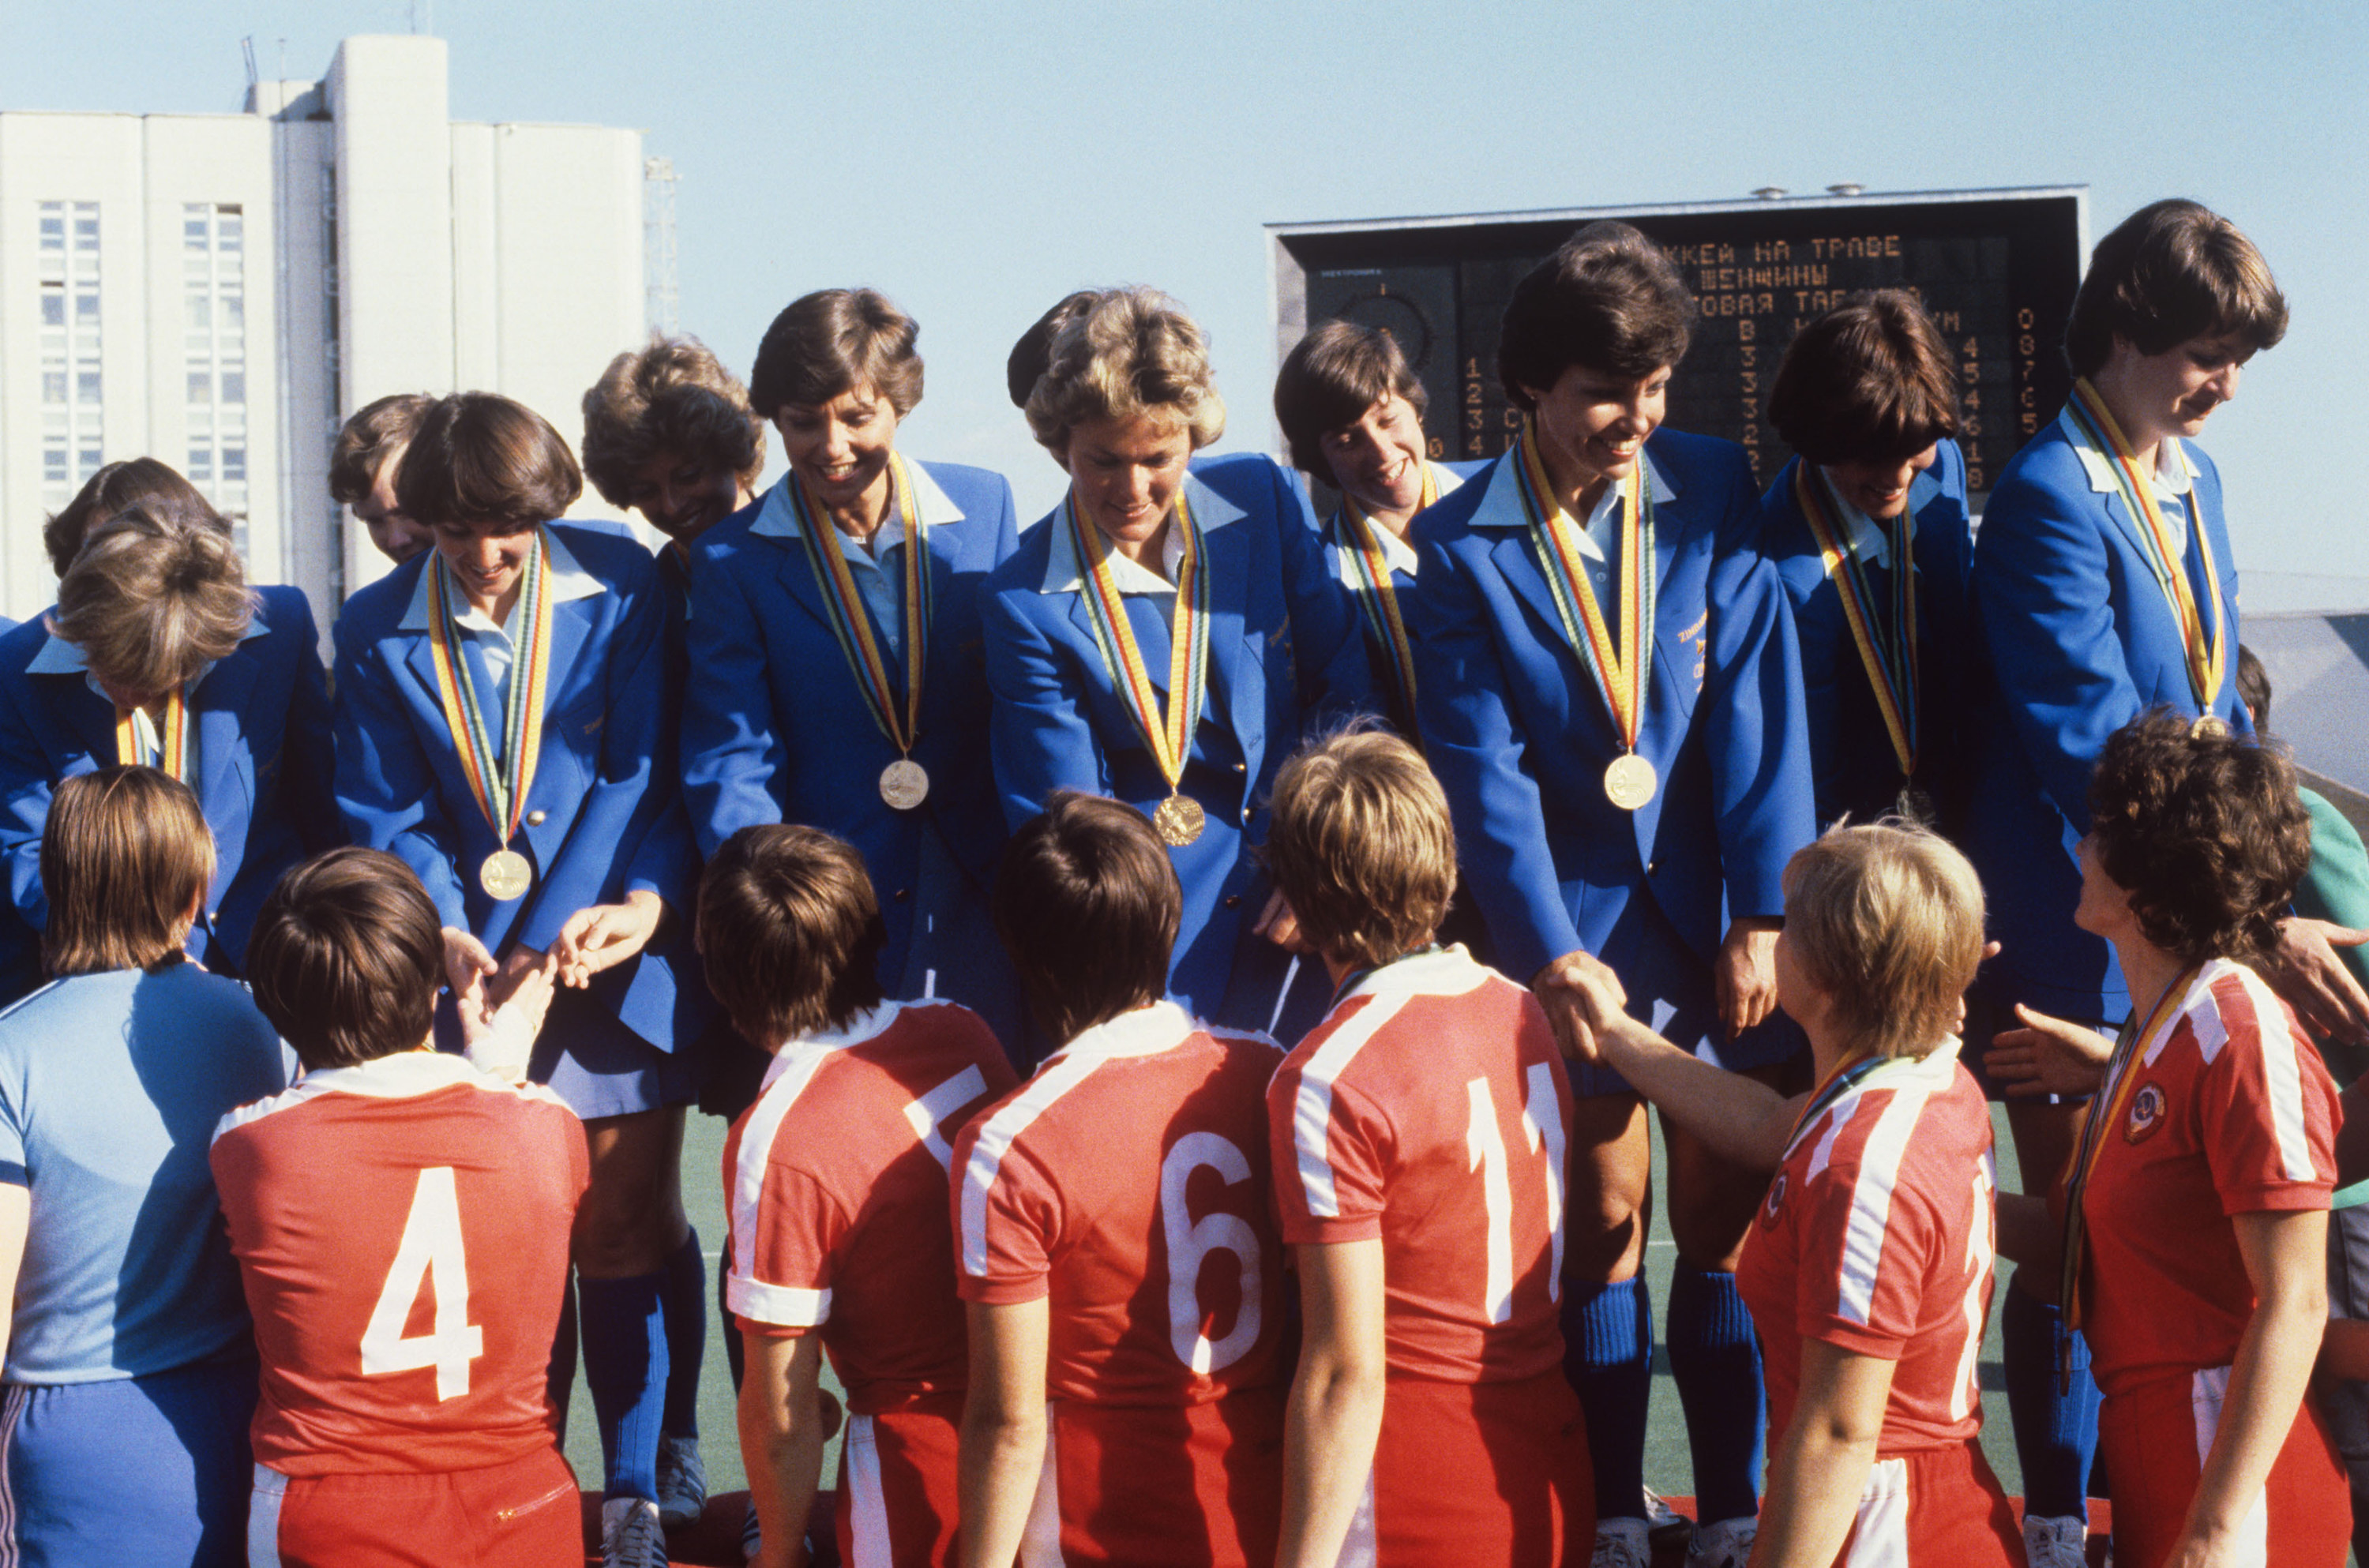 The women&#x27;s field hockey teams from Zimbabwe and USSR shaking hands